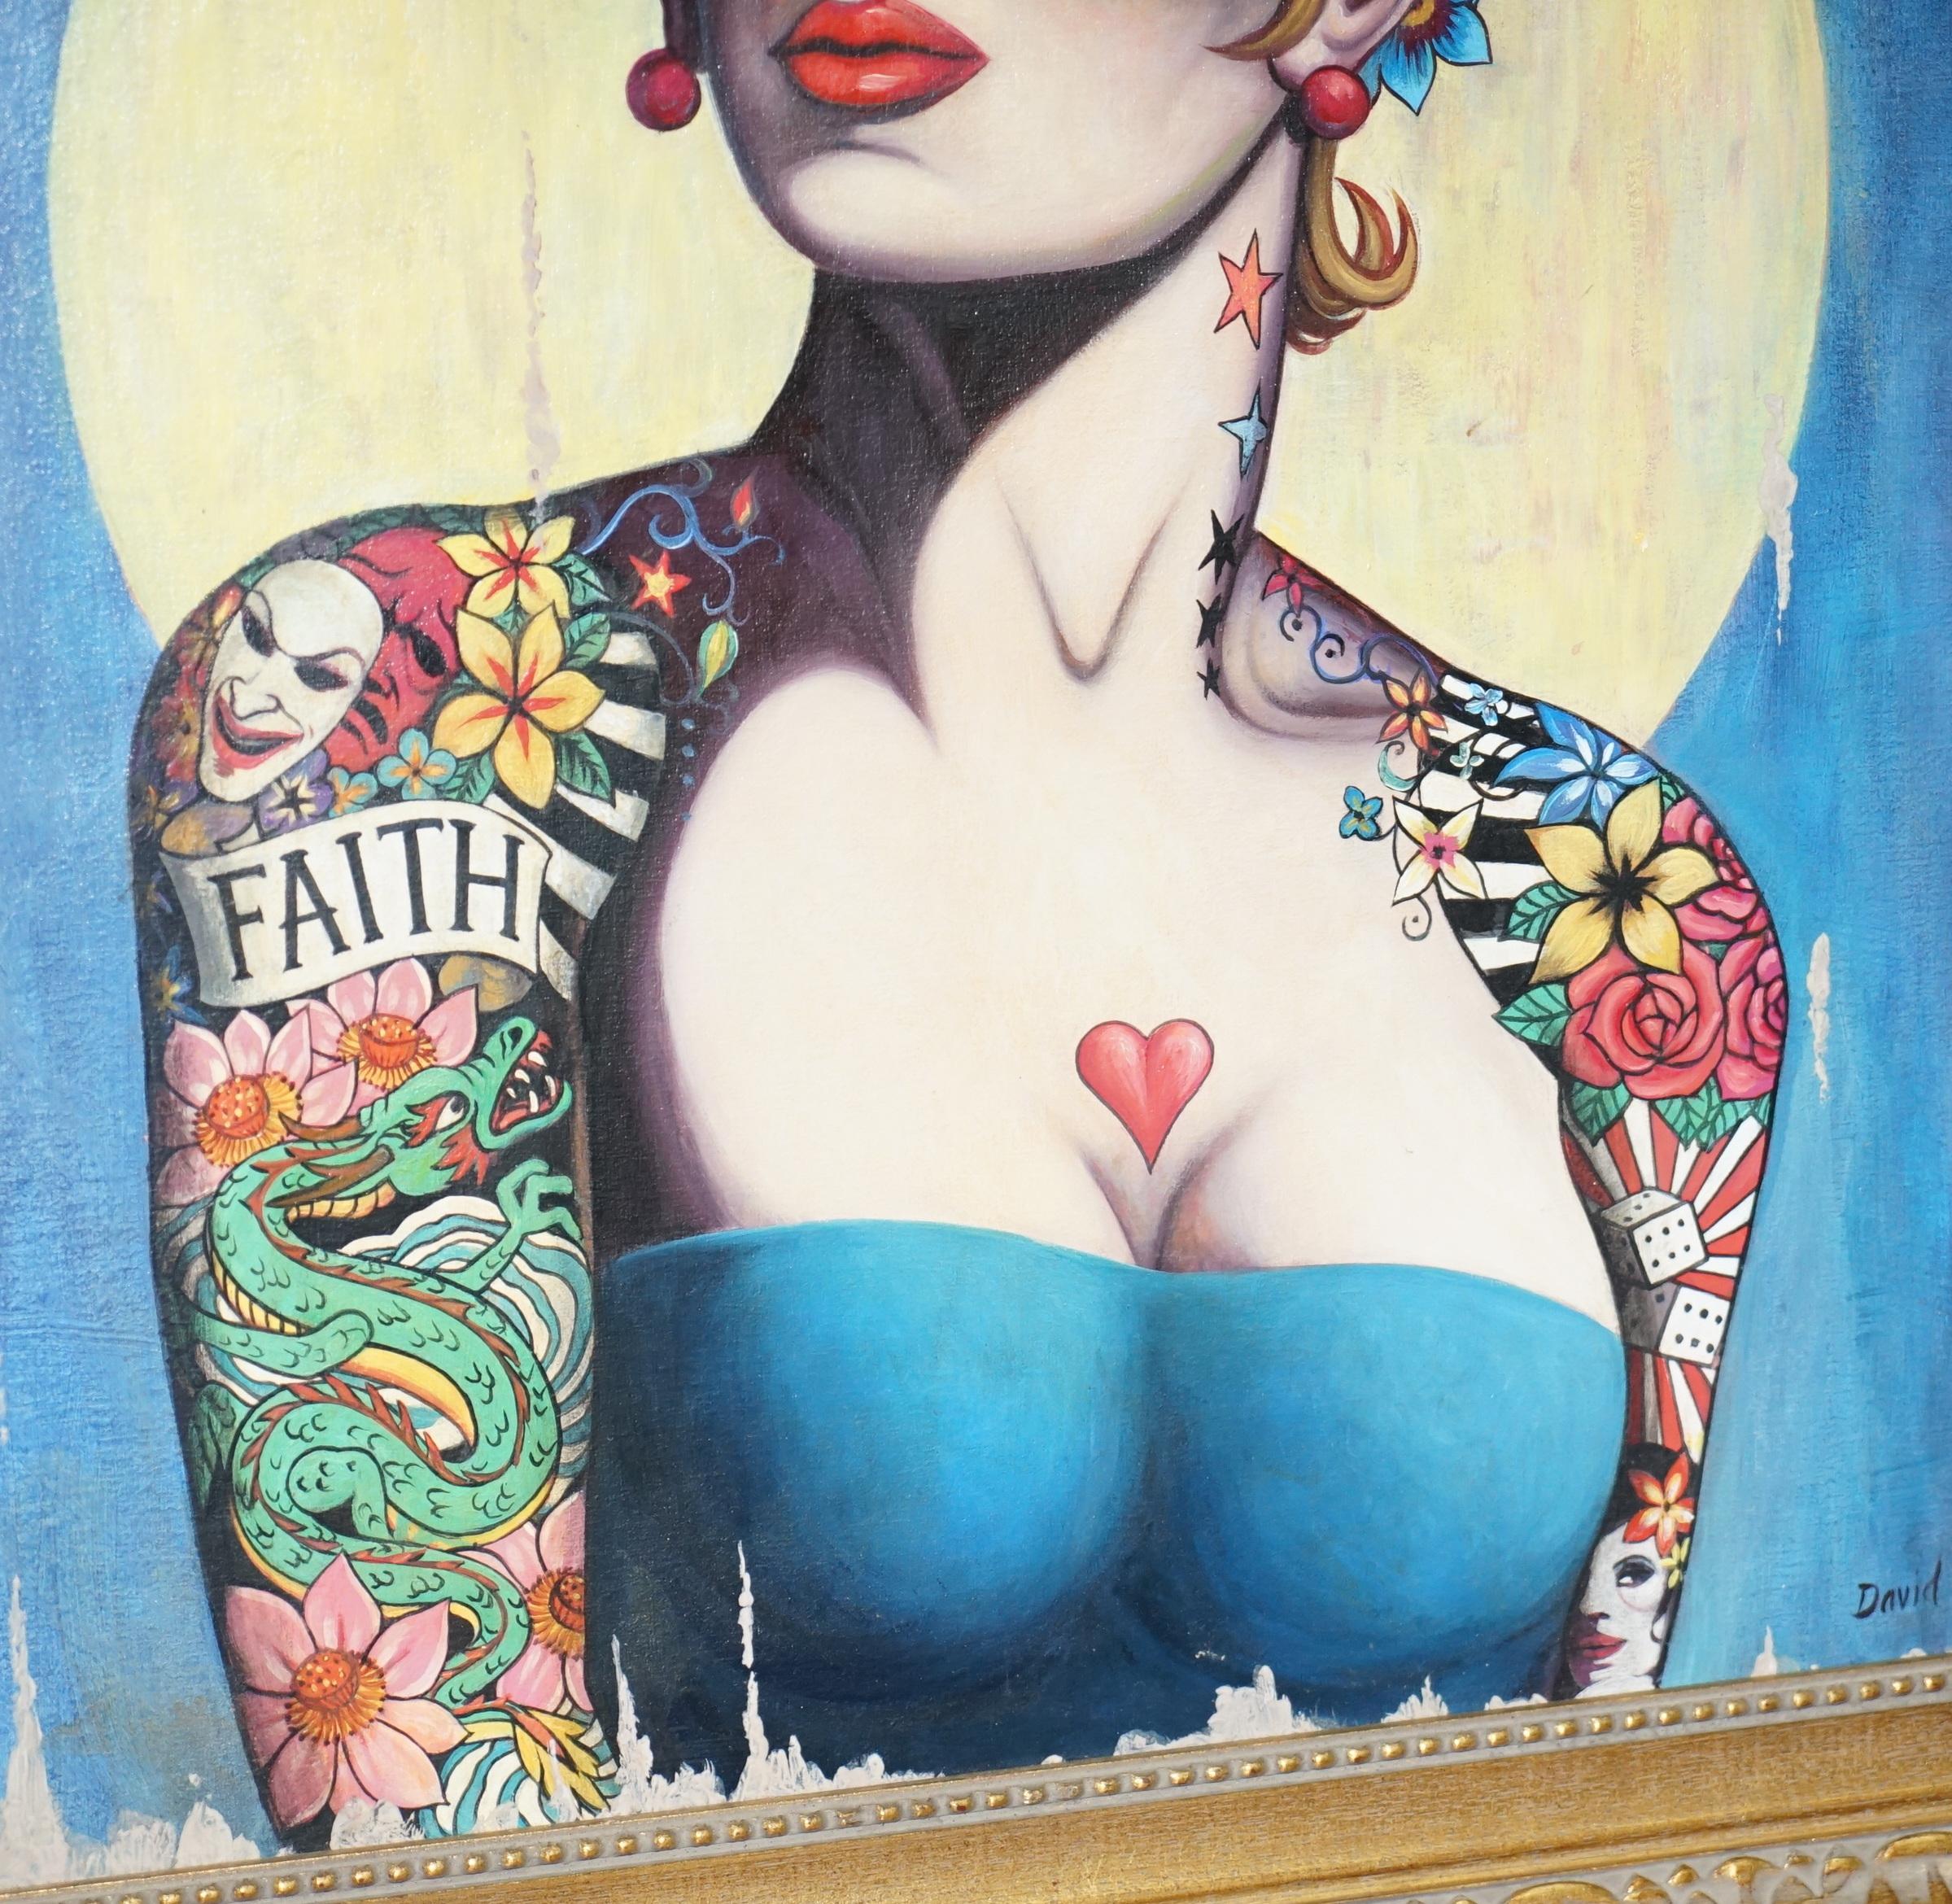 20th Century Sublime David Hall Oil on Boarding Painting of a Very Cool Heavily Tattooed Chic